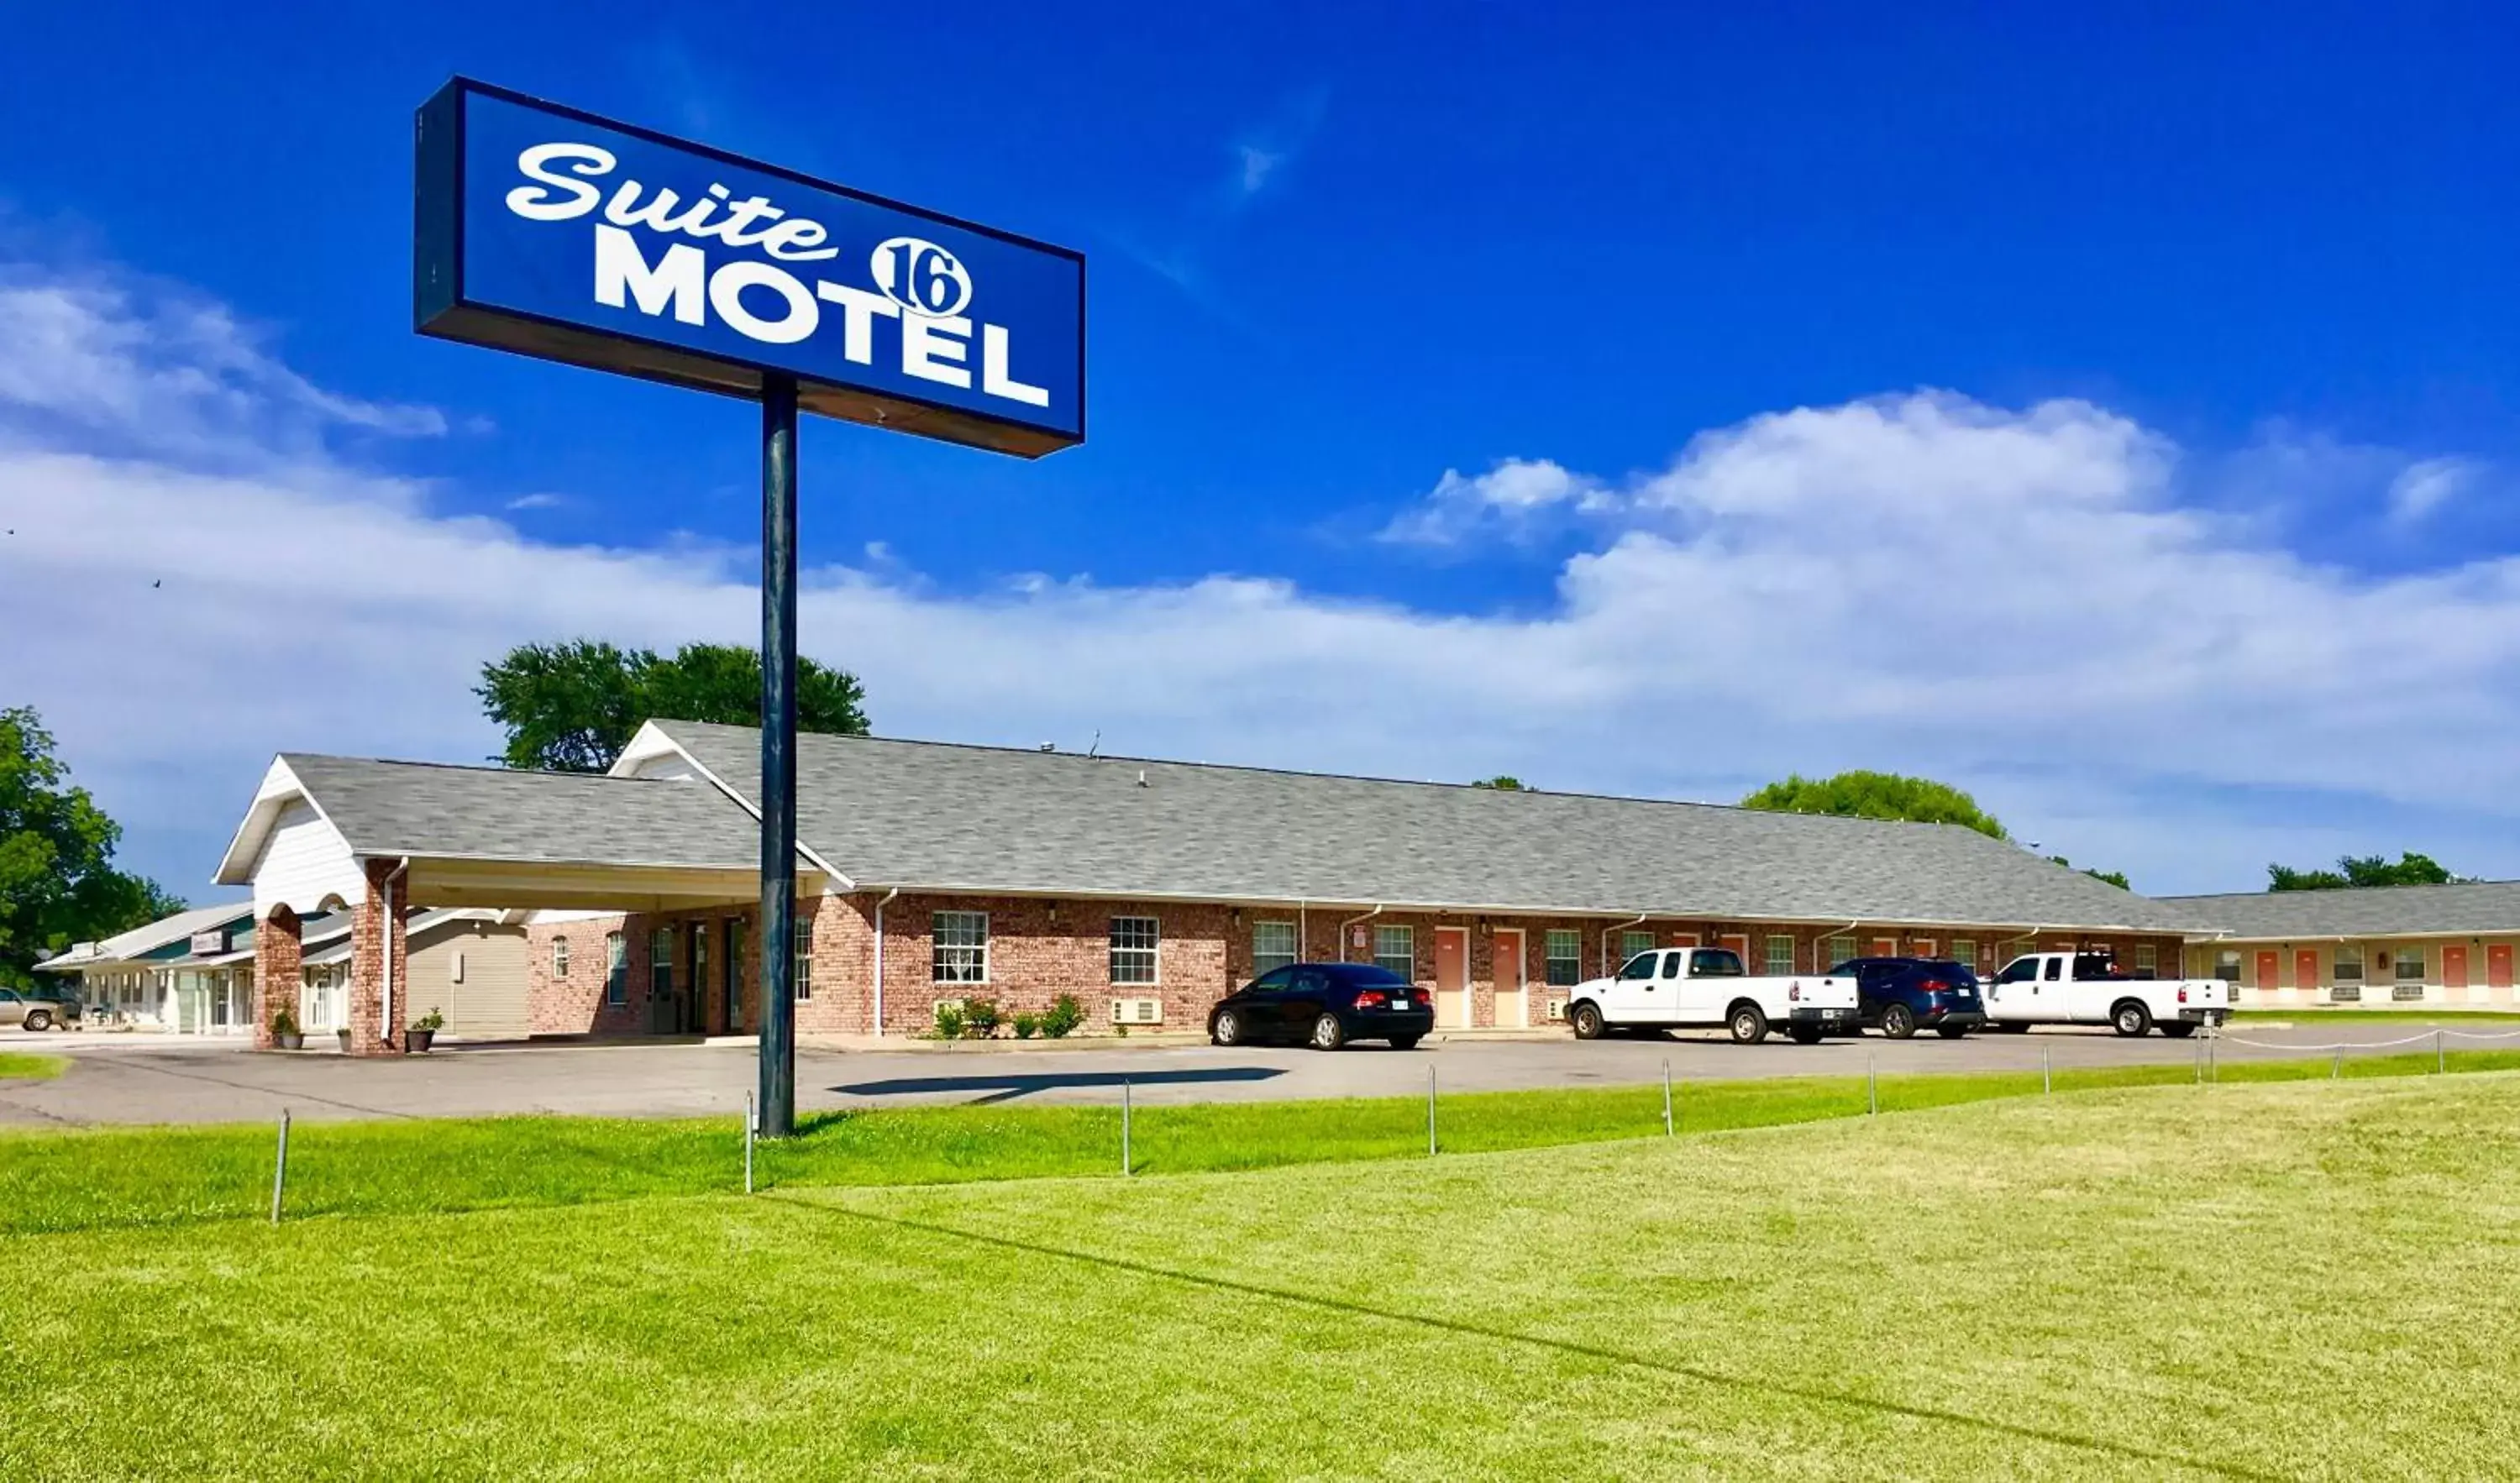 Property Building in Suite 16 Motel